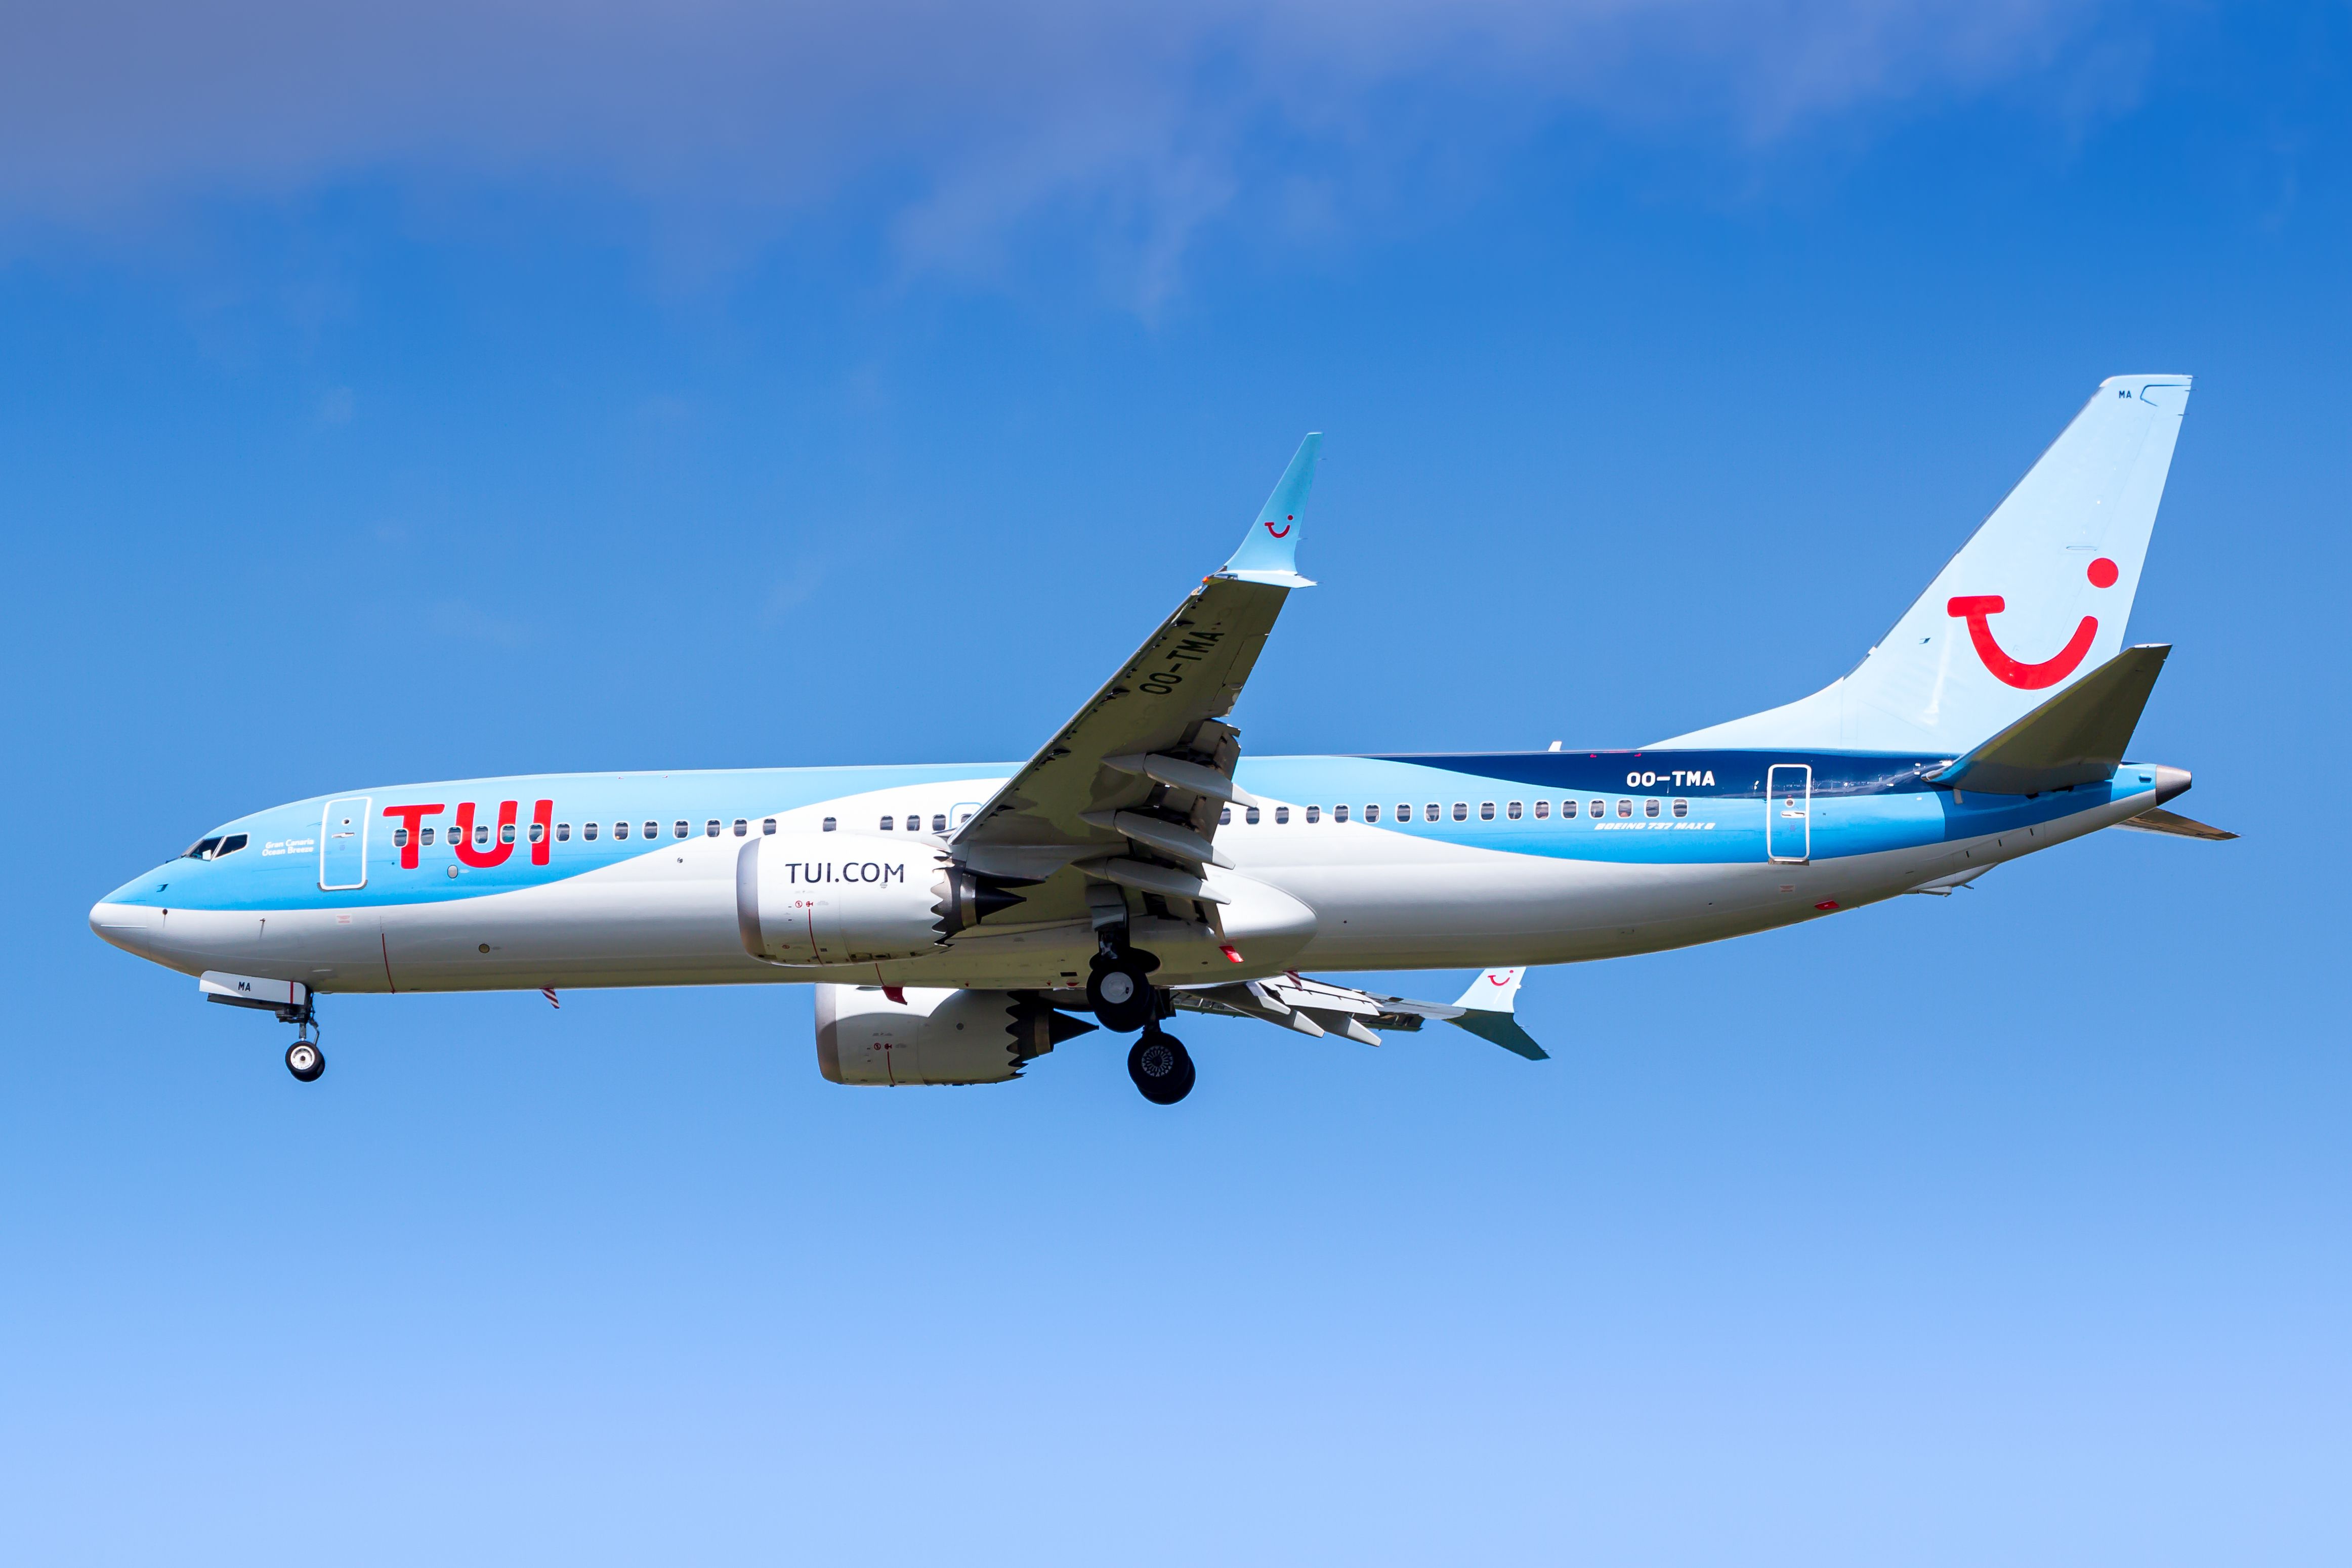 Tui Boeing 737 Max airplane at Paris Charles de Gaulle airport (CDG) in France. Boeing is an aircraft manufacturer based in Seattle, Washington.